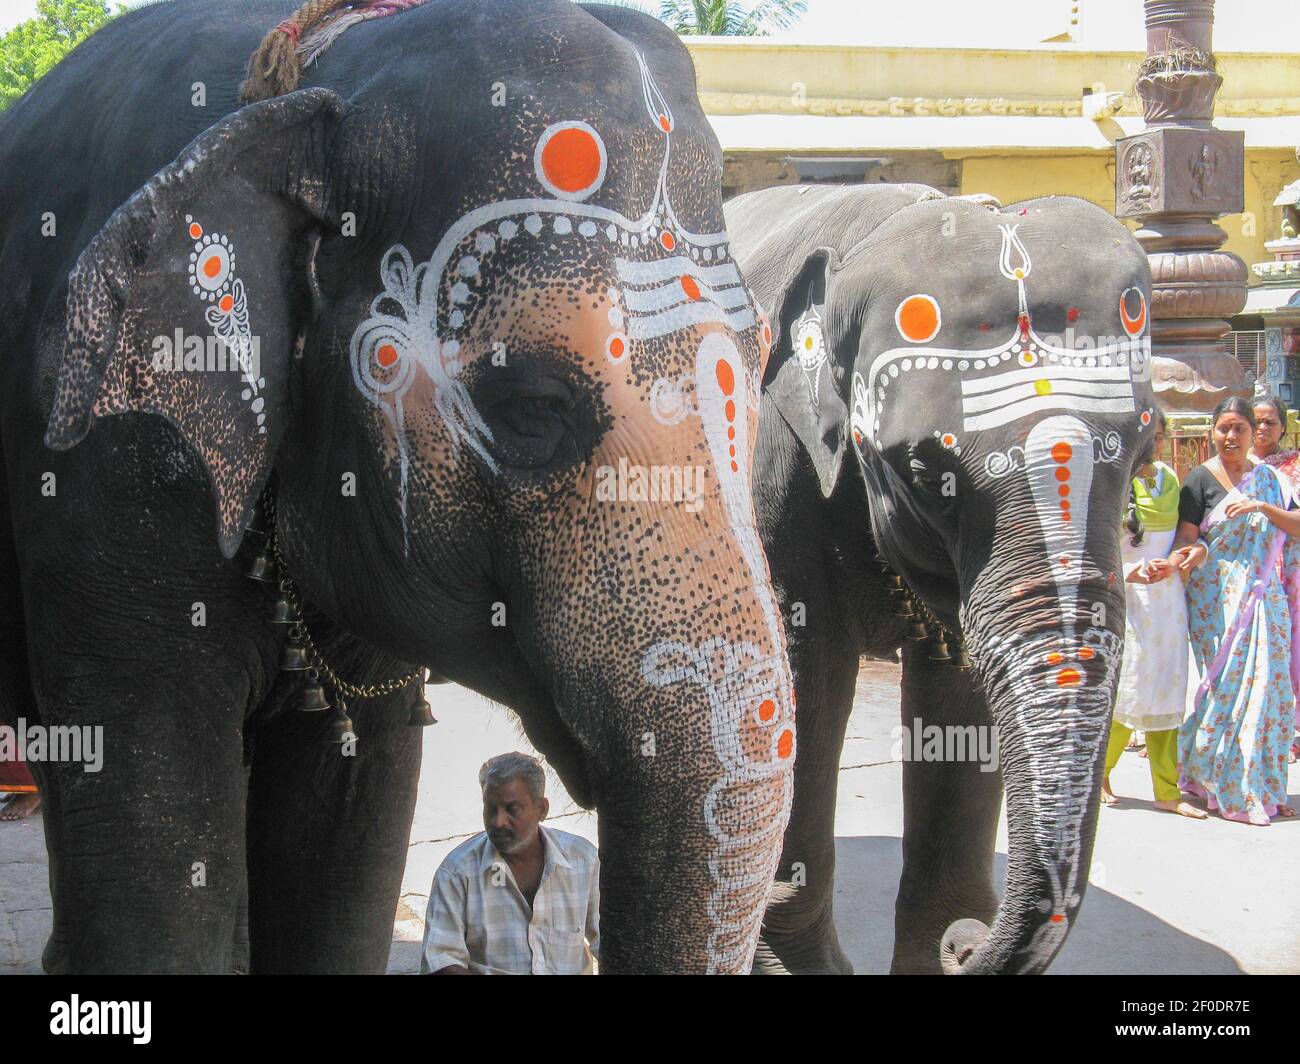 Elephants with colorful marking on them in the temple premises of a south Indian temple at Chennai India on 5 October 2008 Stock Photo